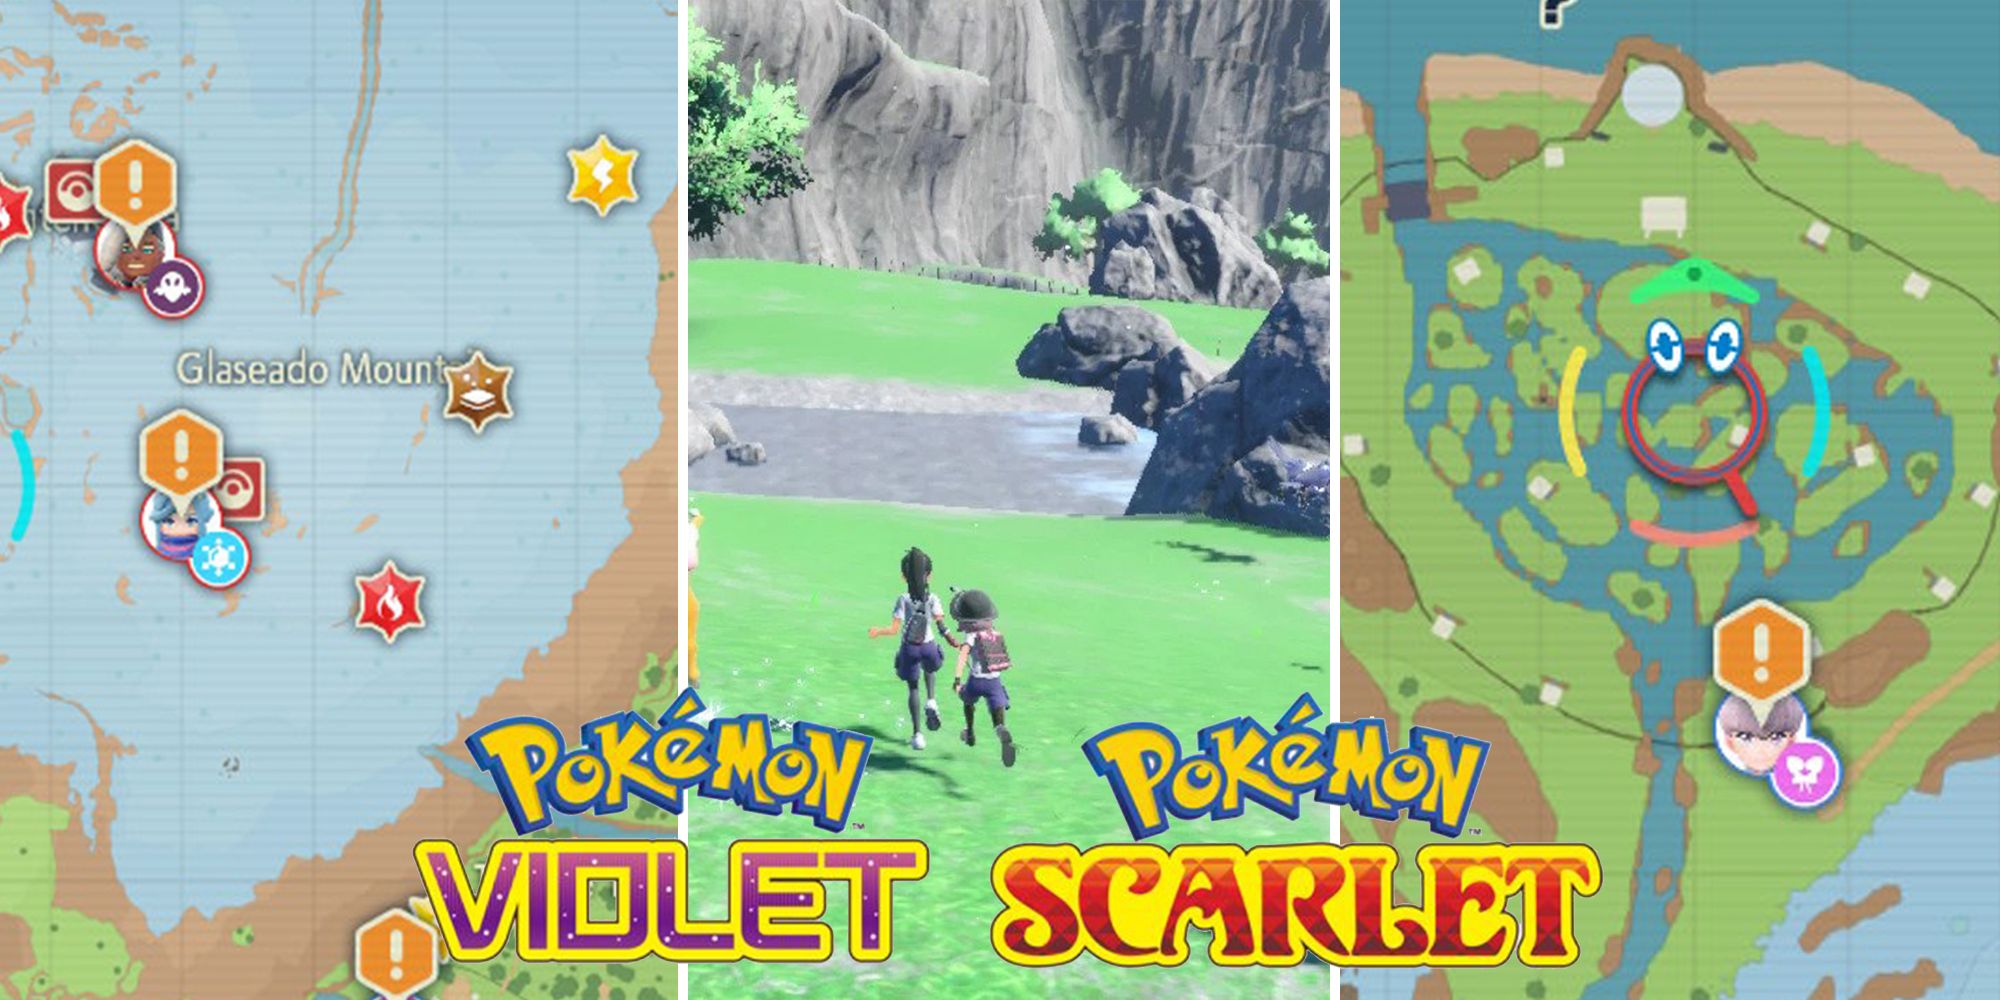 Pokemon Scarlet and Violet: 10 Best Areas, Ranked By Difficulty